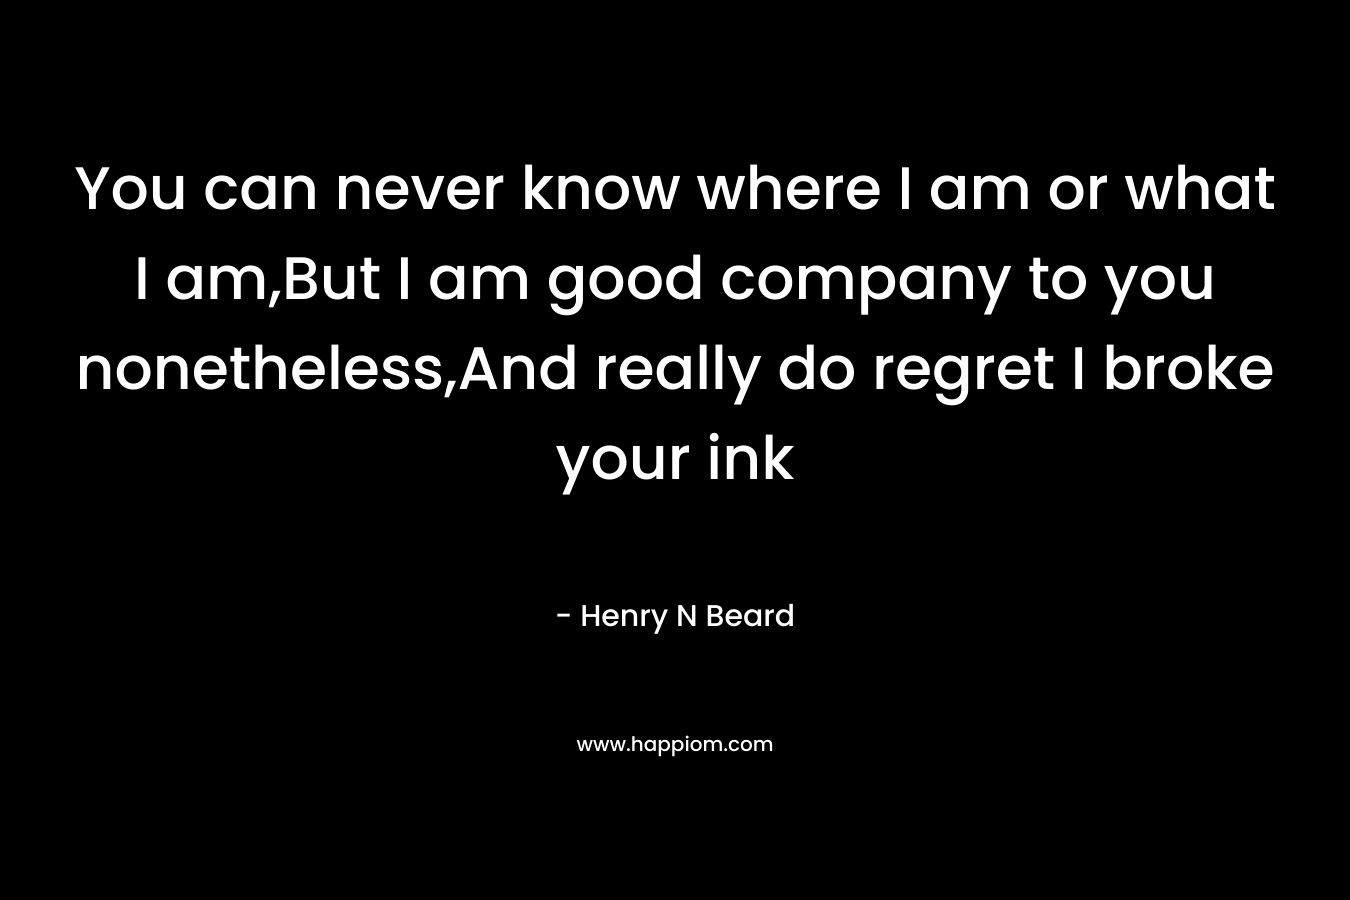 You can never know where I am or what I am,But I am good company to you nonetheless,And really do regret I broke your ink – Henry N Beard